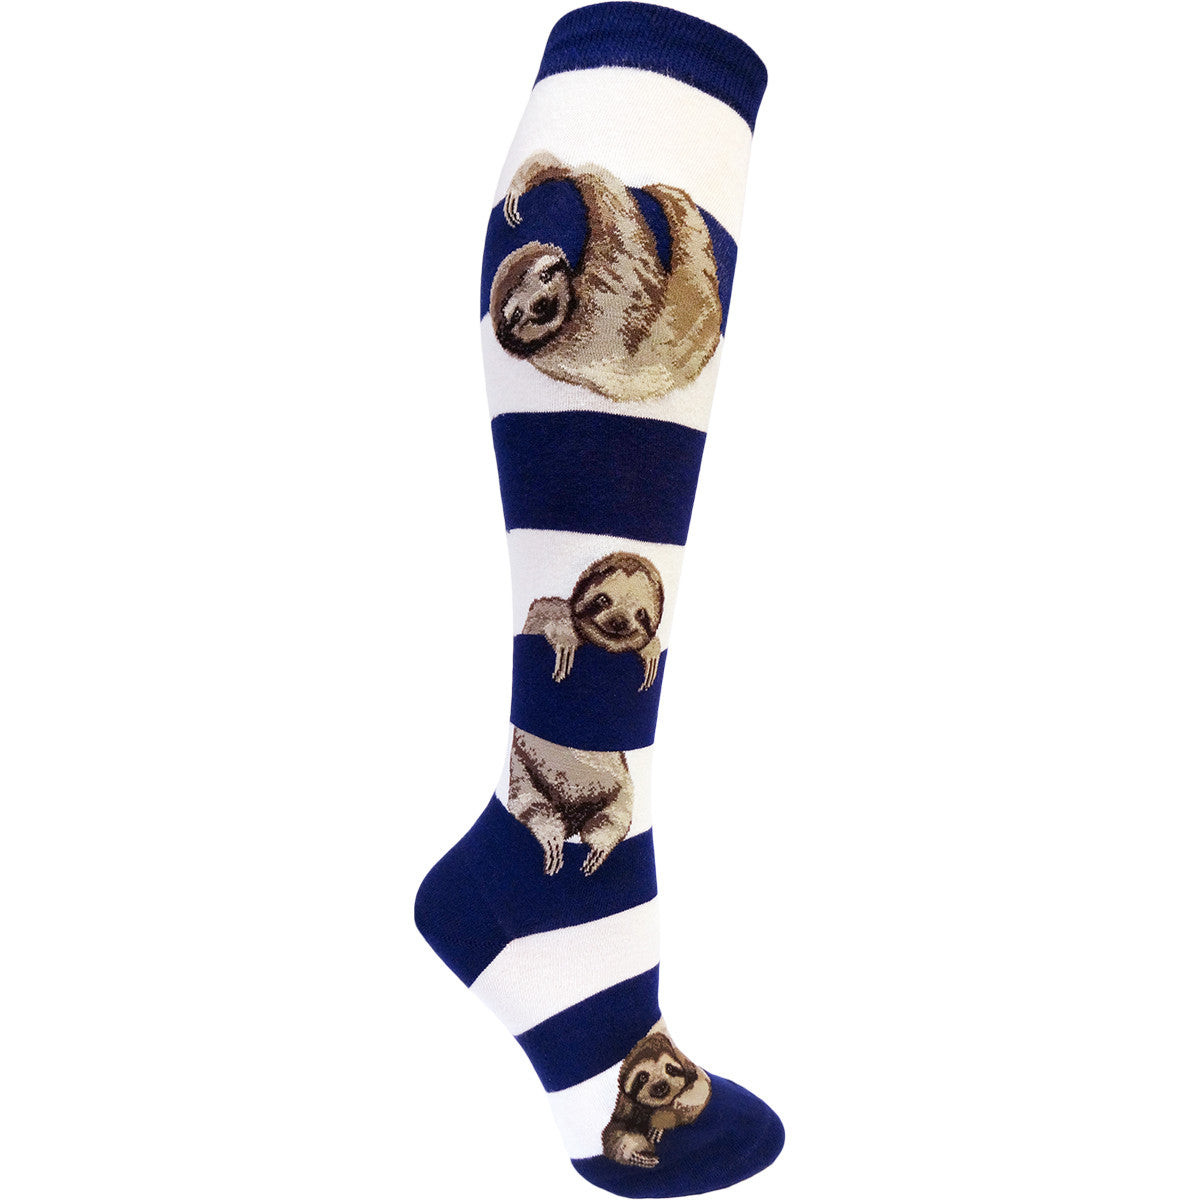 Sloth on a Striped Women's Knee High - Navy